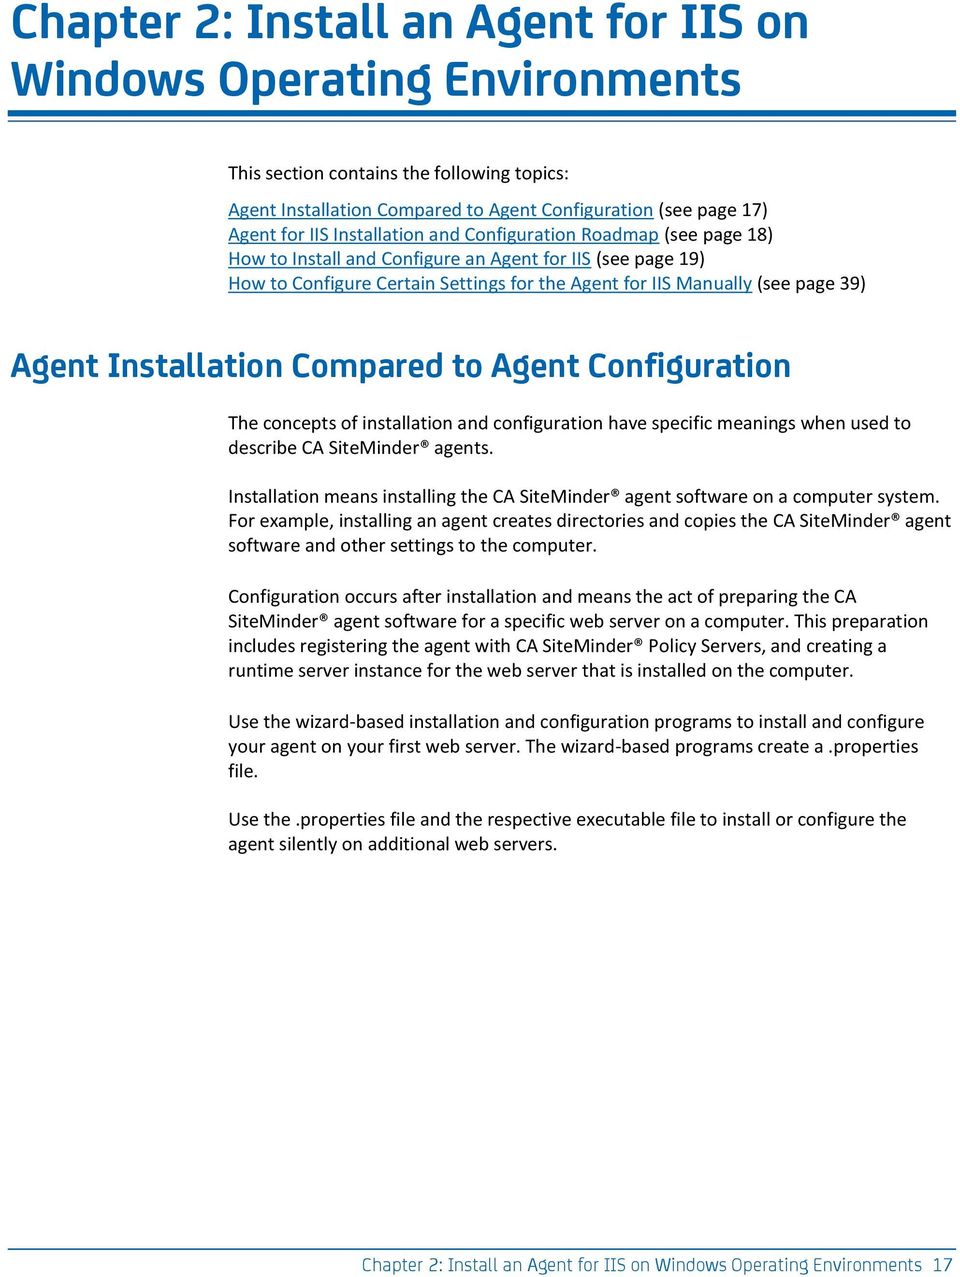 Installation Compared to Agent Configuration The concepts of installation and configuration have specific meanings when used to describe CA SiteMinder agents.